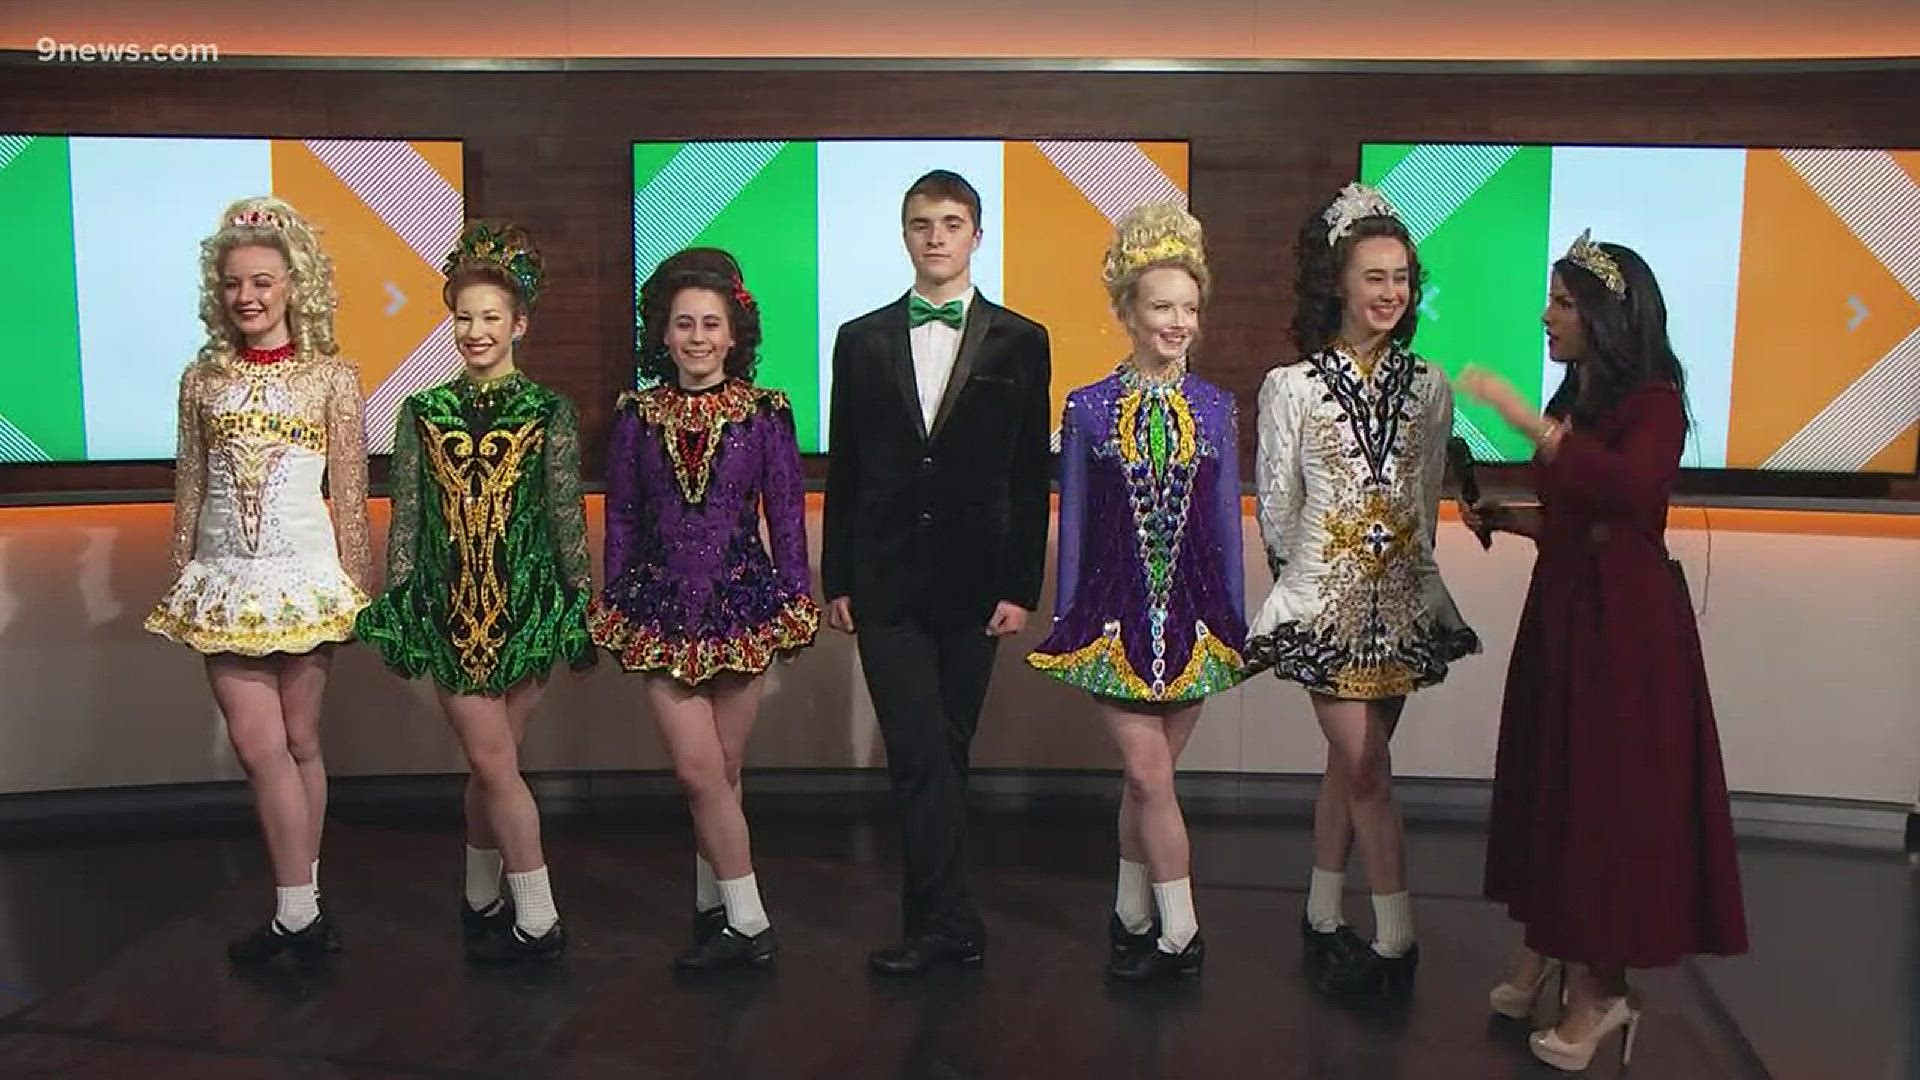 Ahead of St. Patrick's Day, some Irish dancers from the Wick School of Irish Dance stopped by to show off their skills.